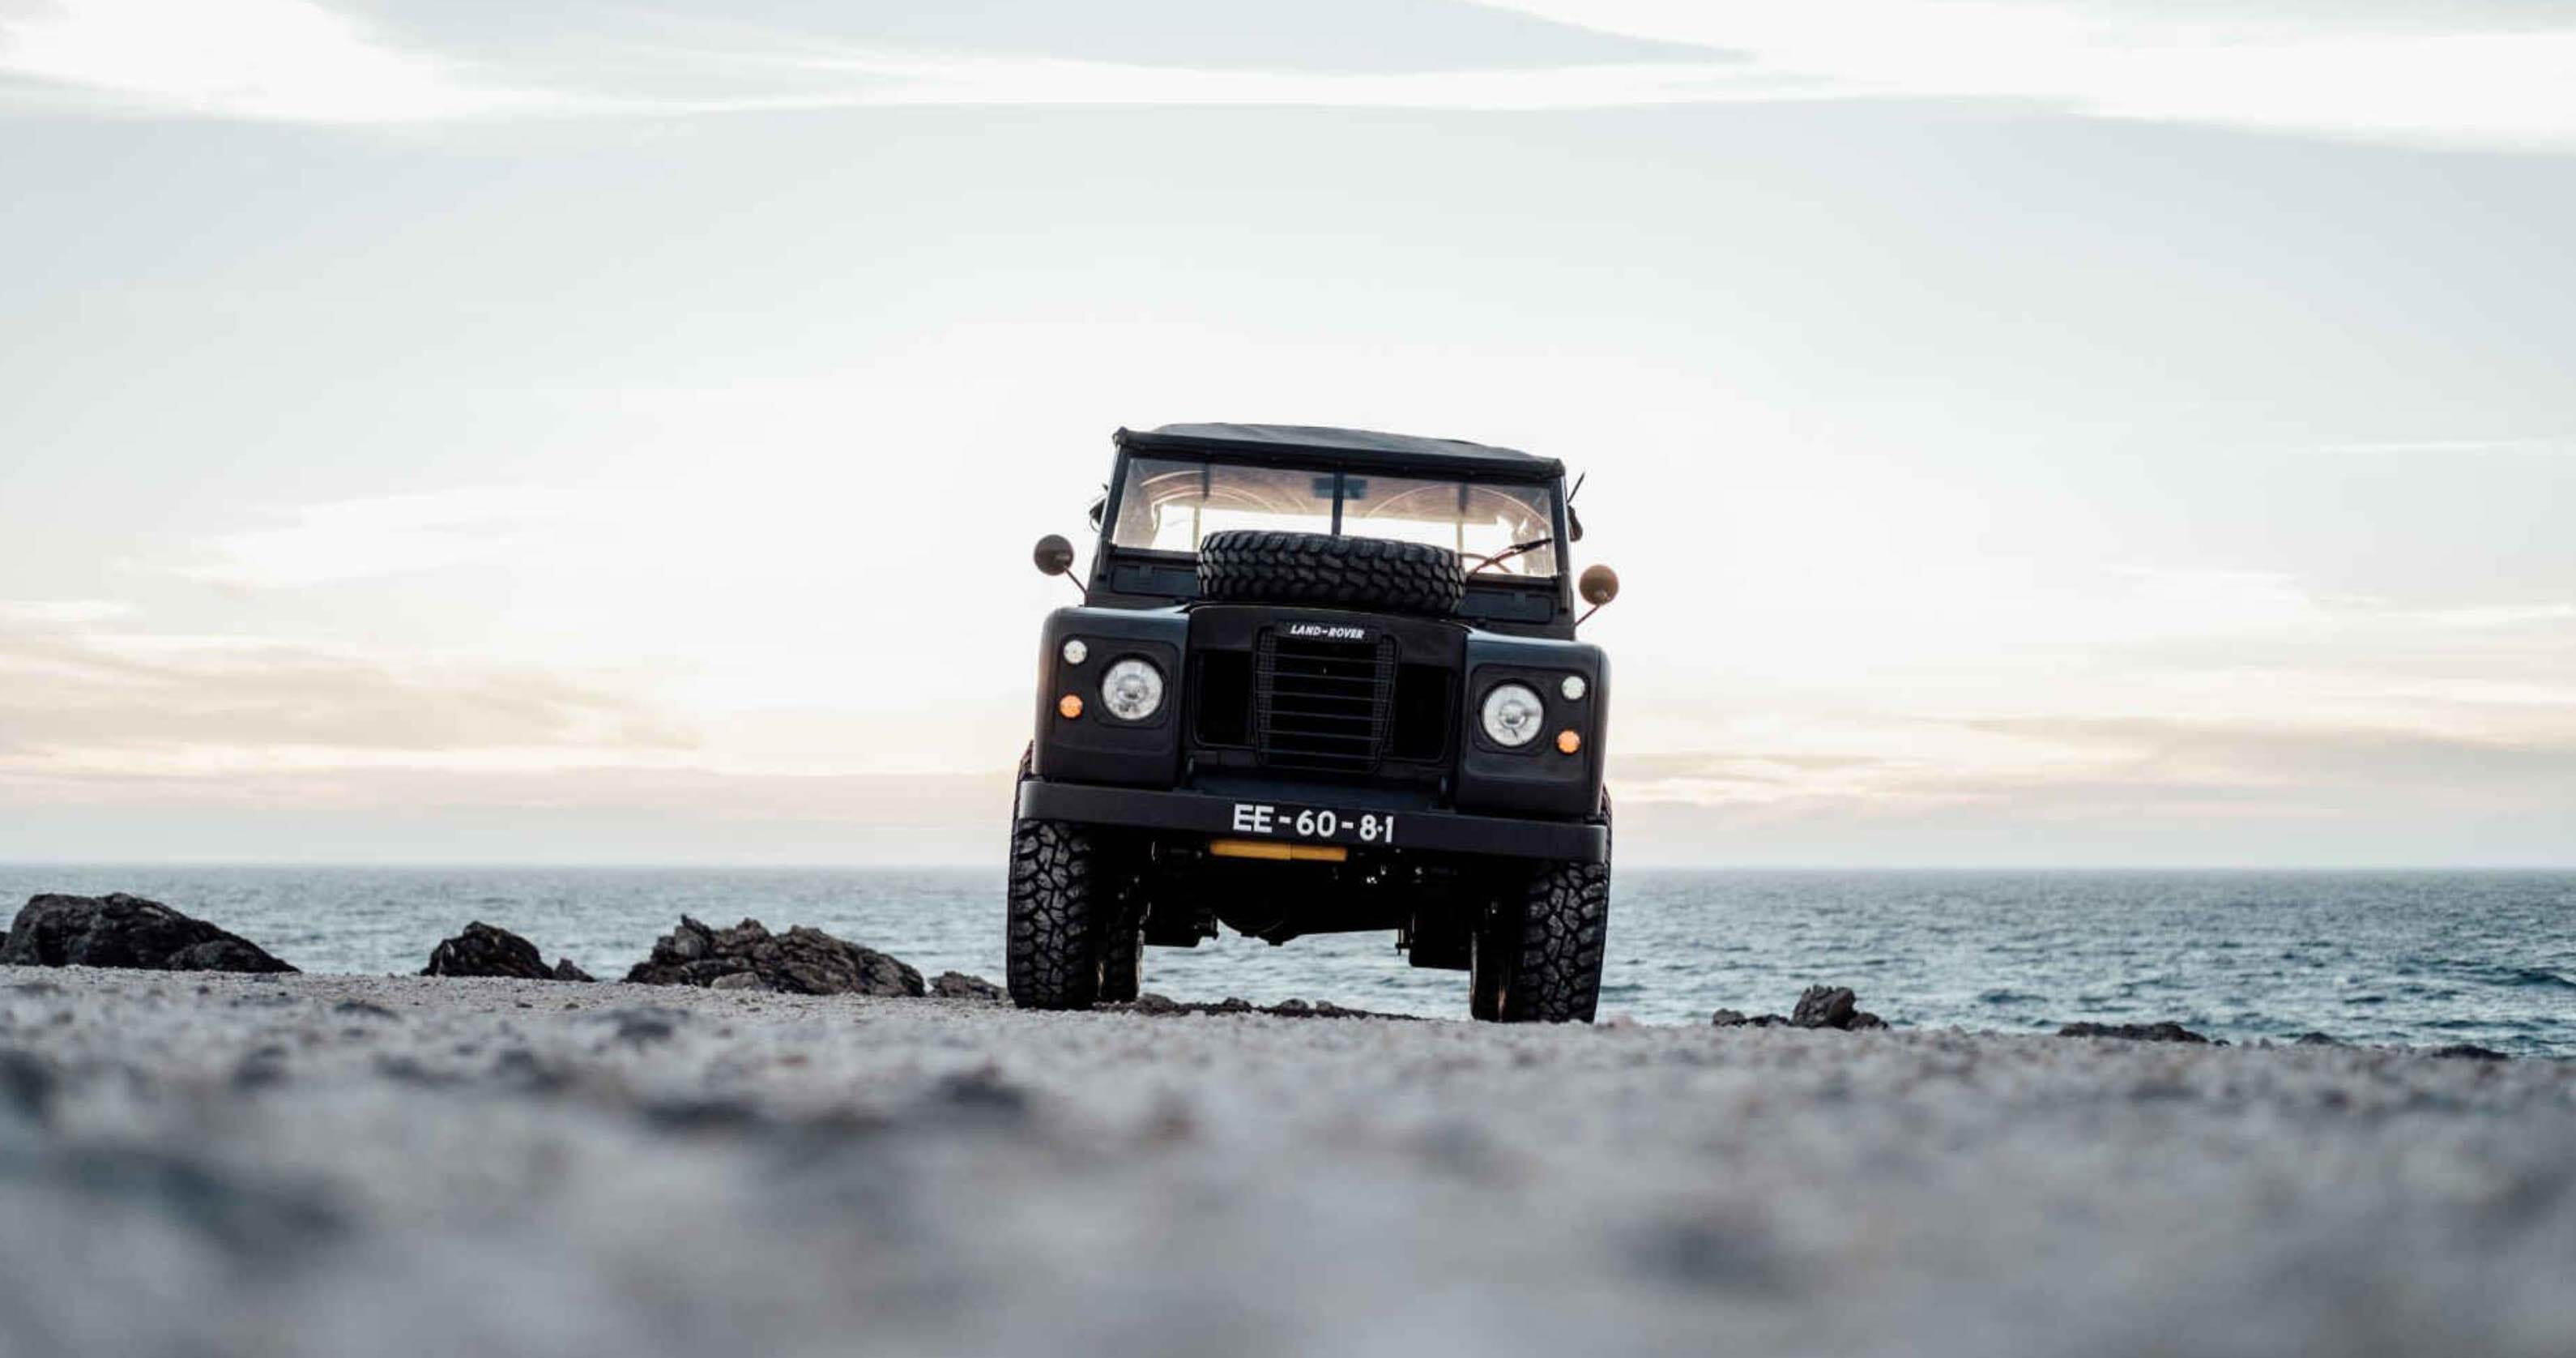 The Matte Black 1979 Land Rover Series III Built For Any Beach Trip